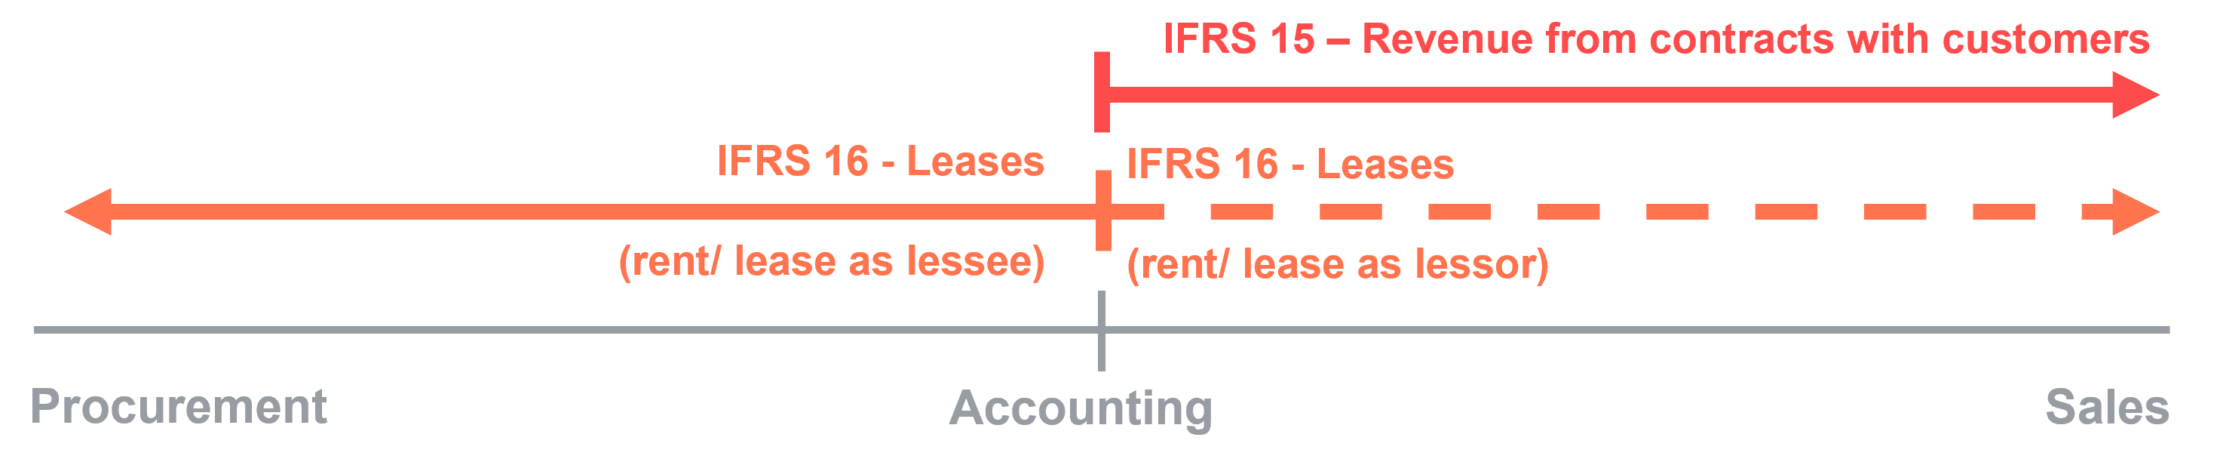 Departmental correlations for accounting according to IFRS 15 &16